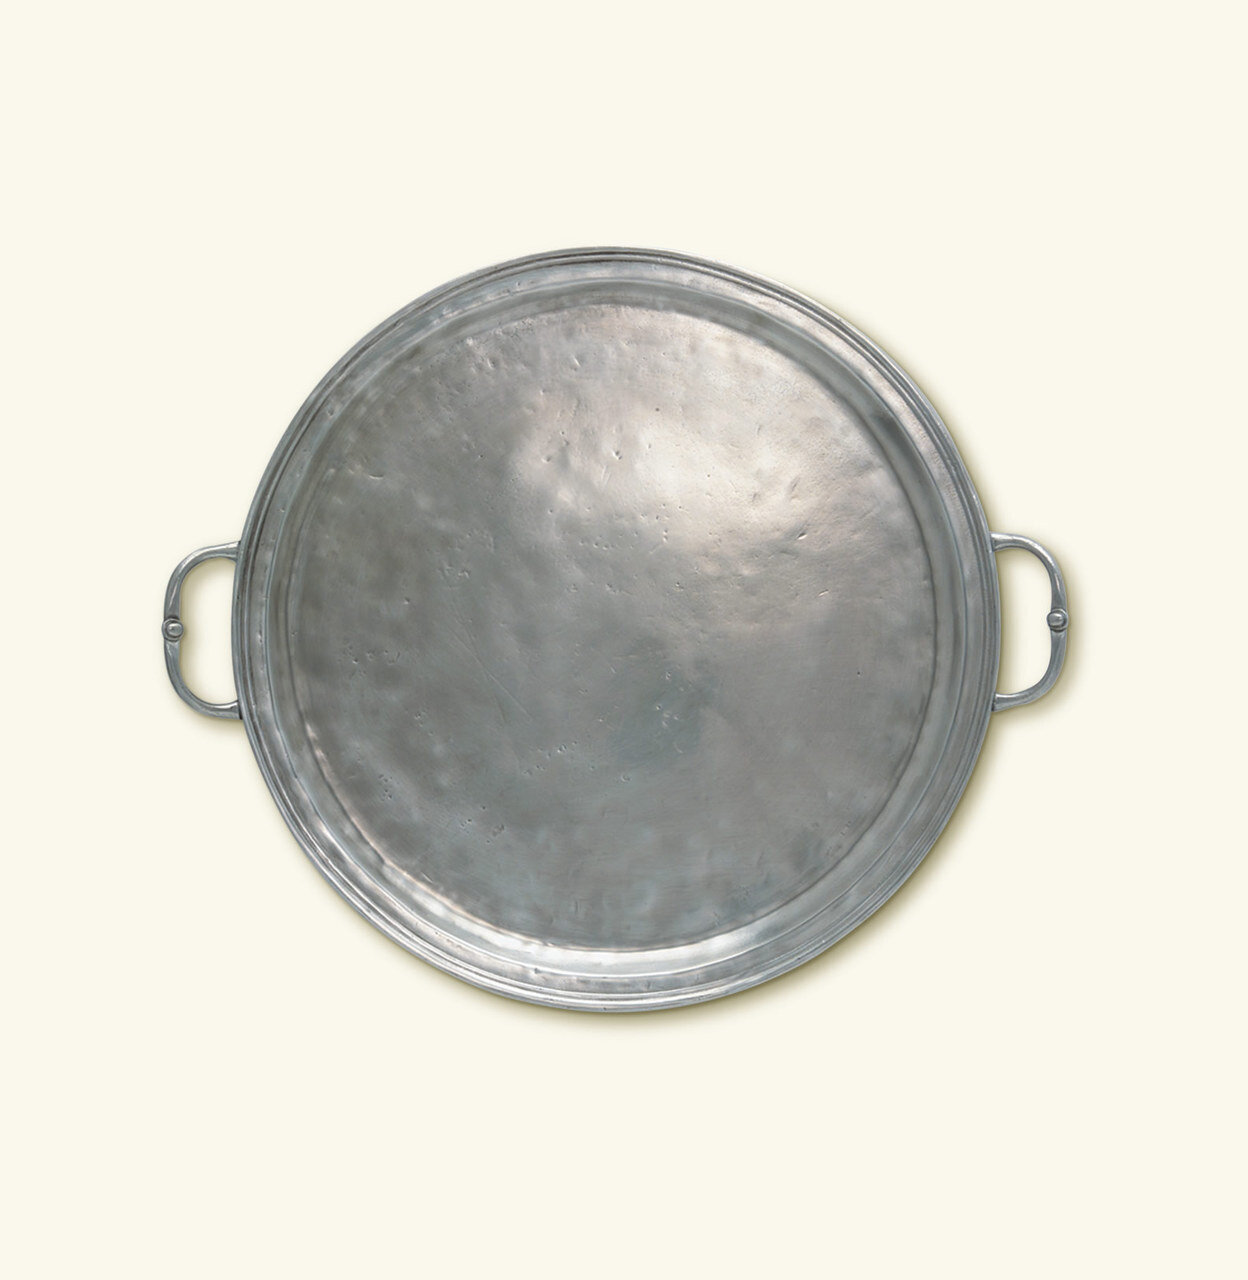 Match Pewter Round Tray With Handles Large  a360.0